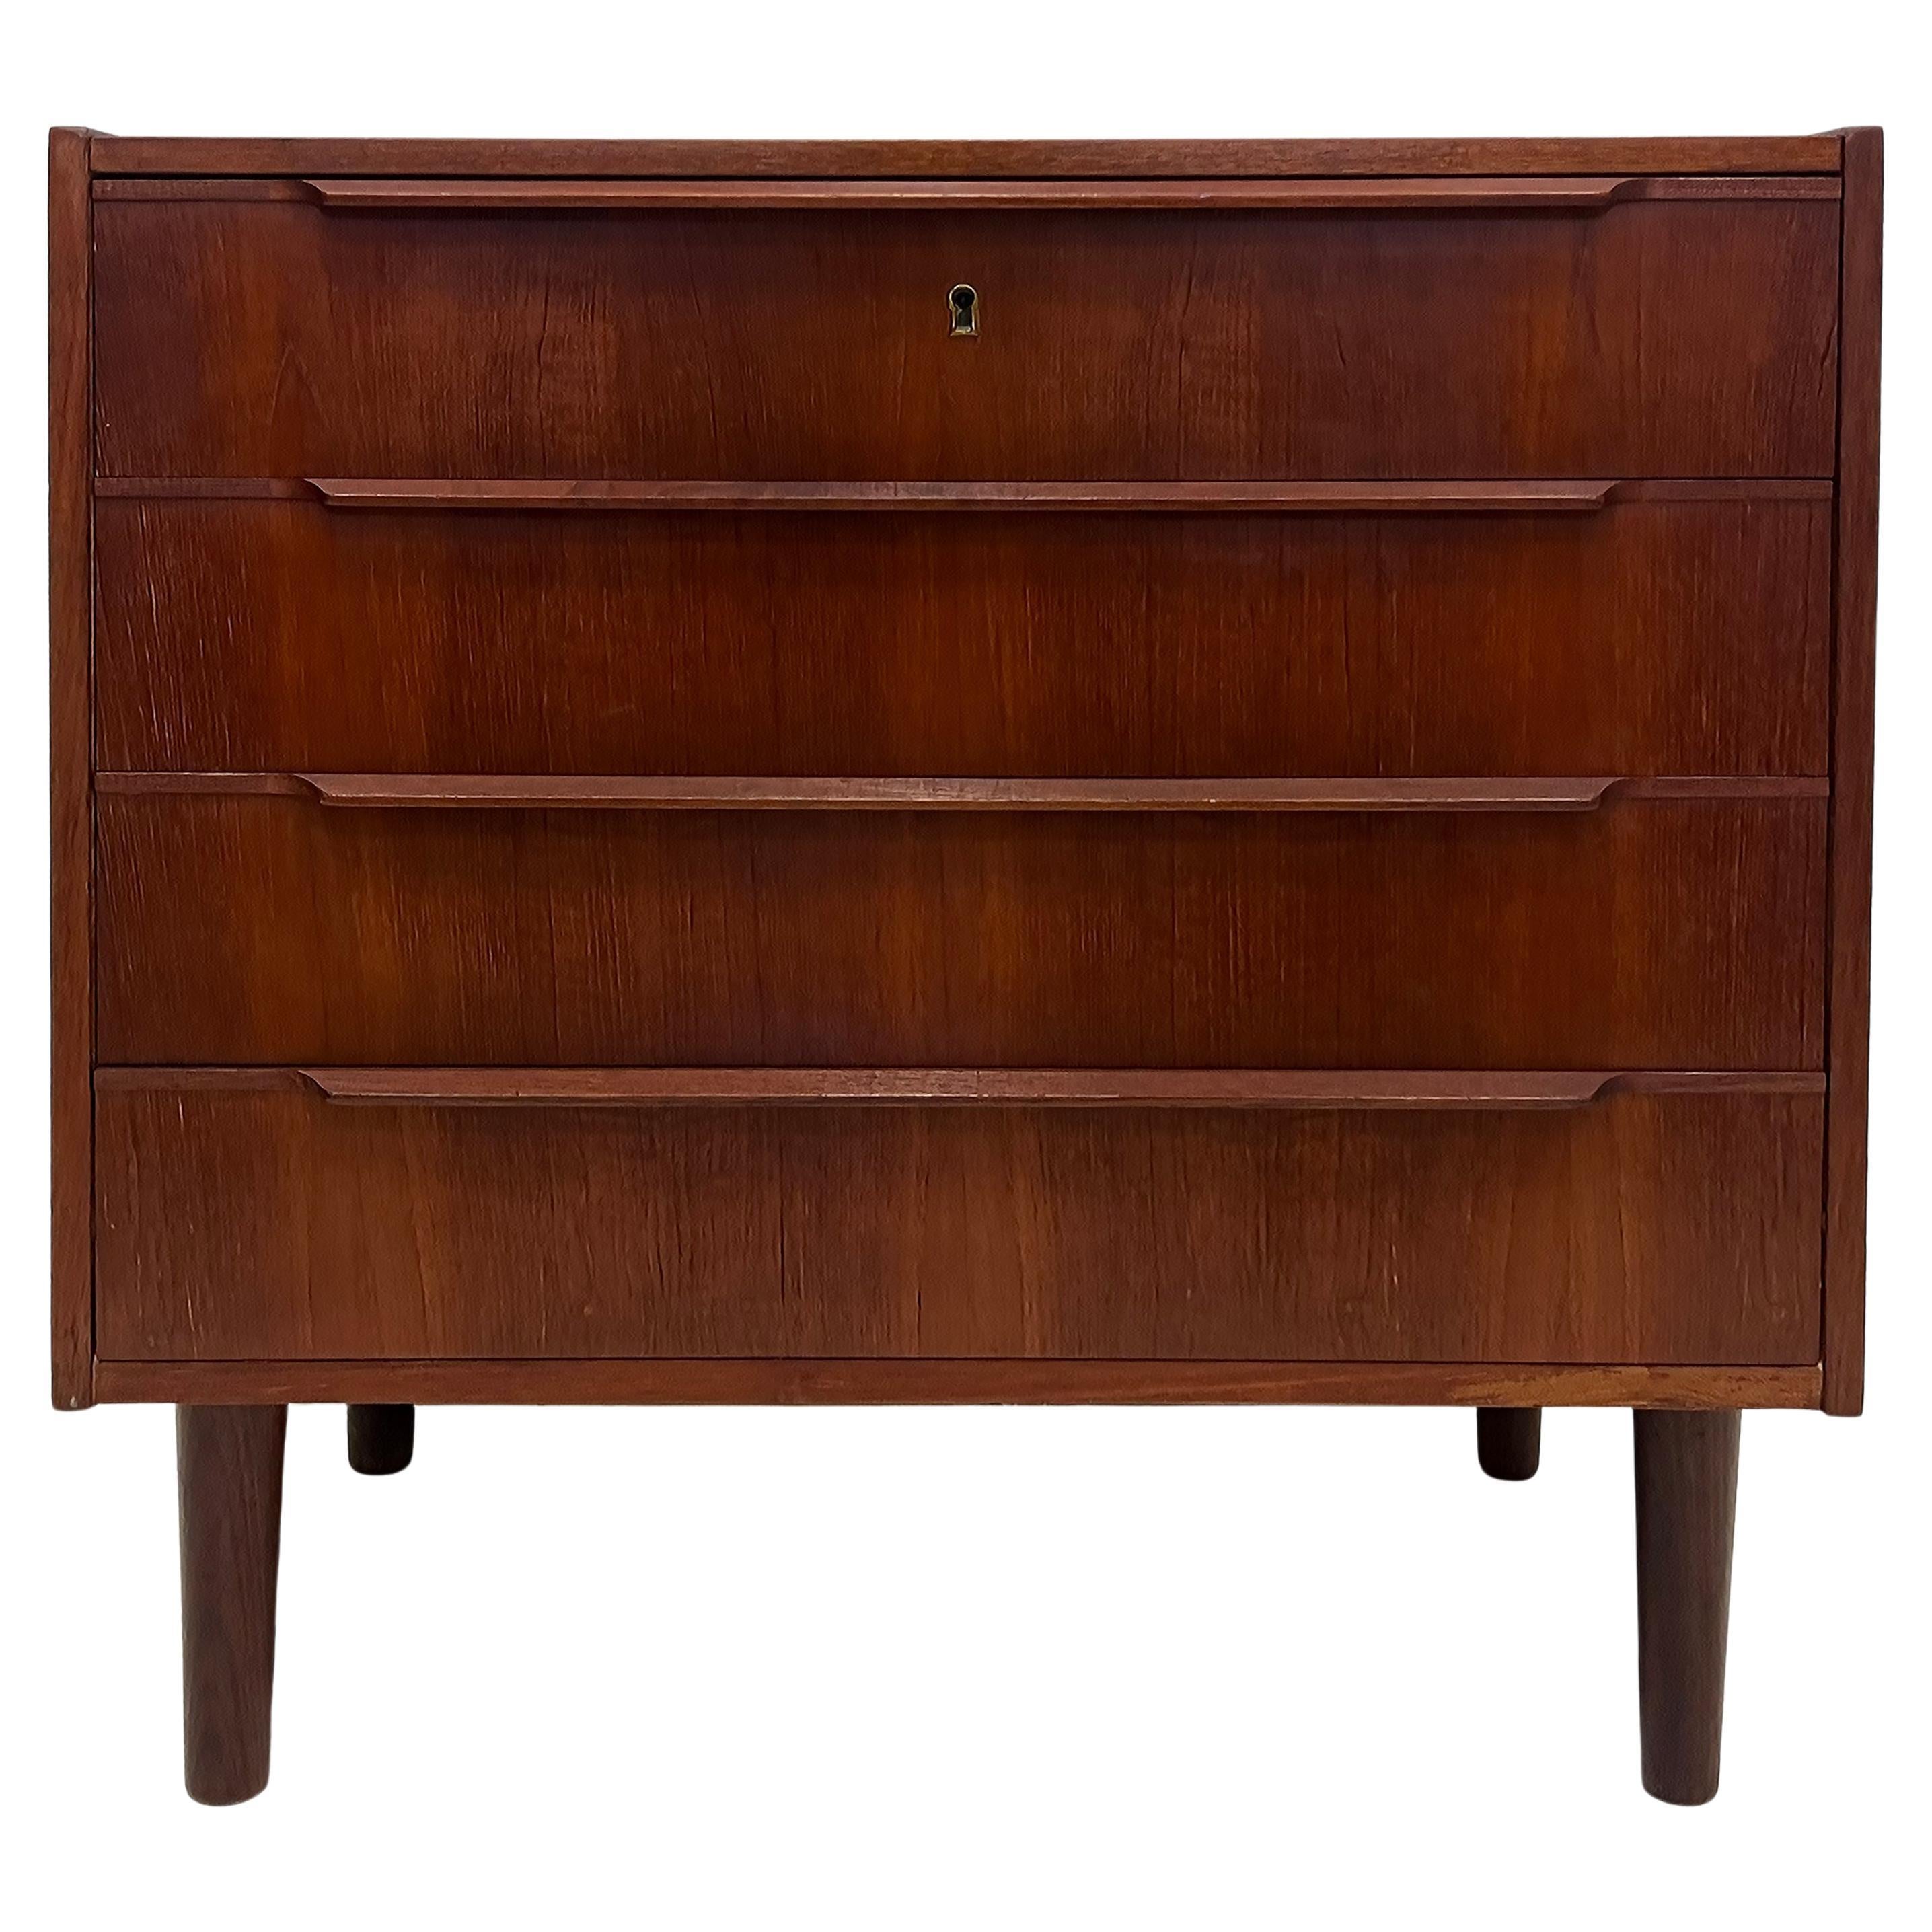 1950s Vintage Danish Modern Teak Cabinet with Lock and 4 Drawers For Sale